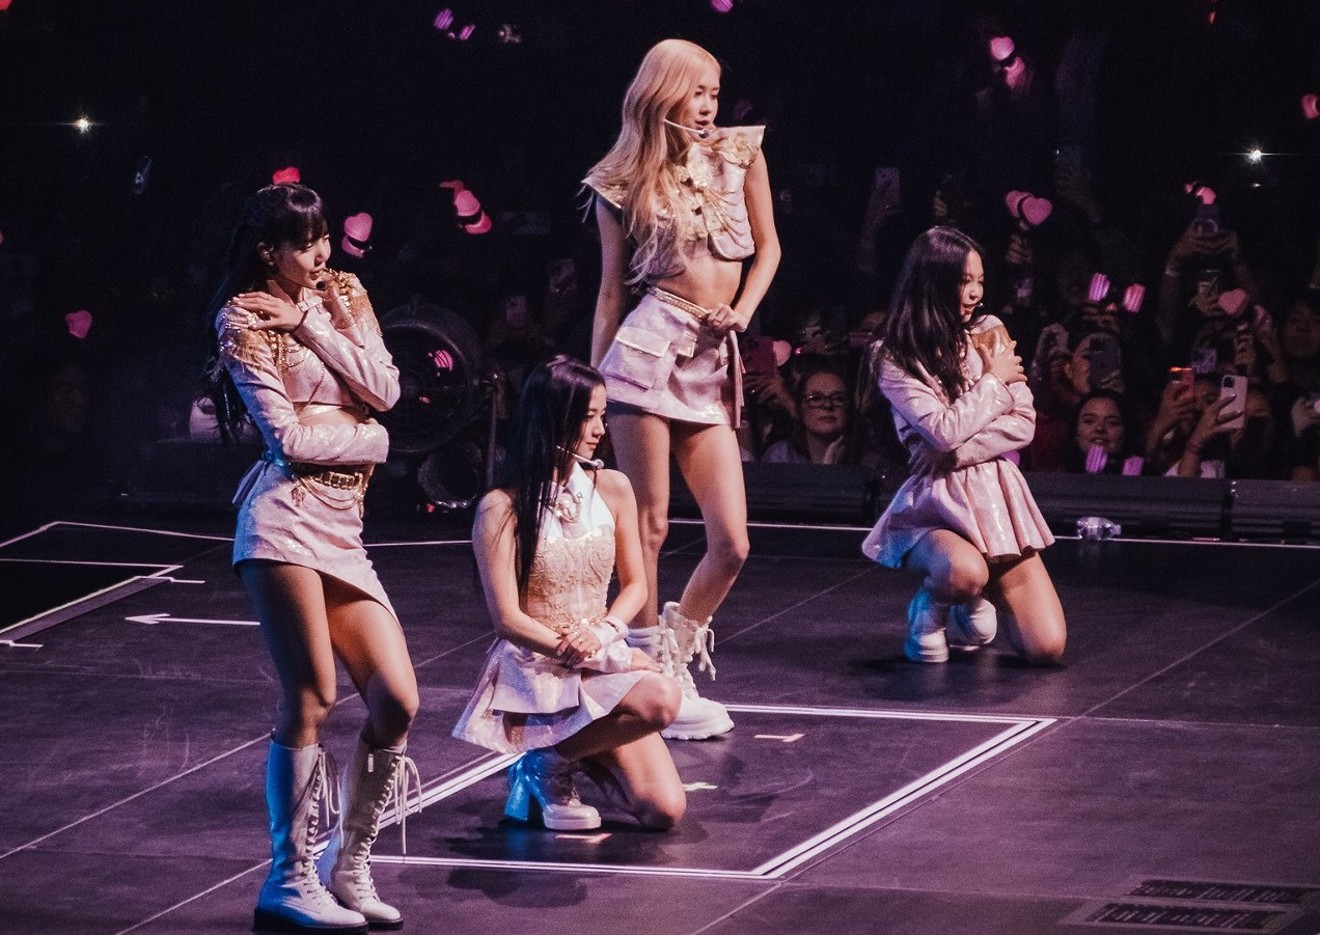 Lisa, Jisoo, Rosé and Jennie's outfit game was on point.